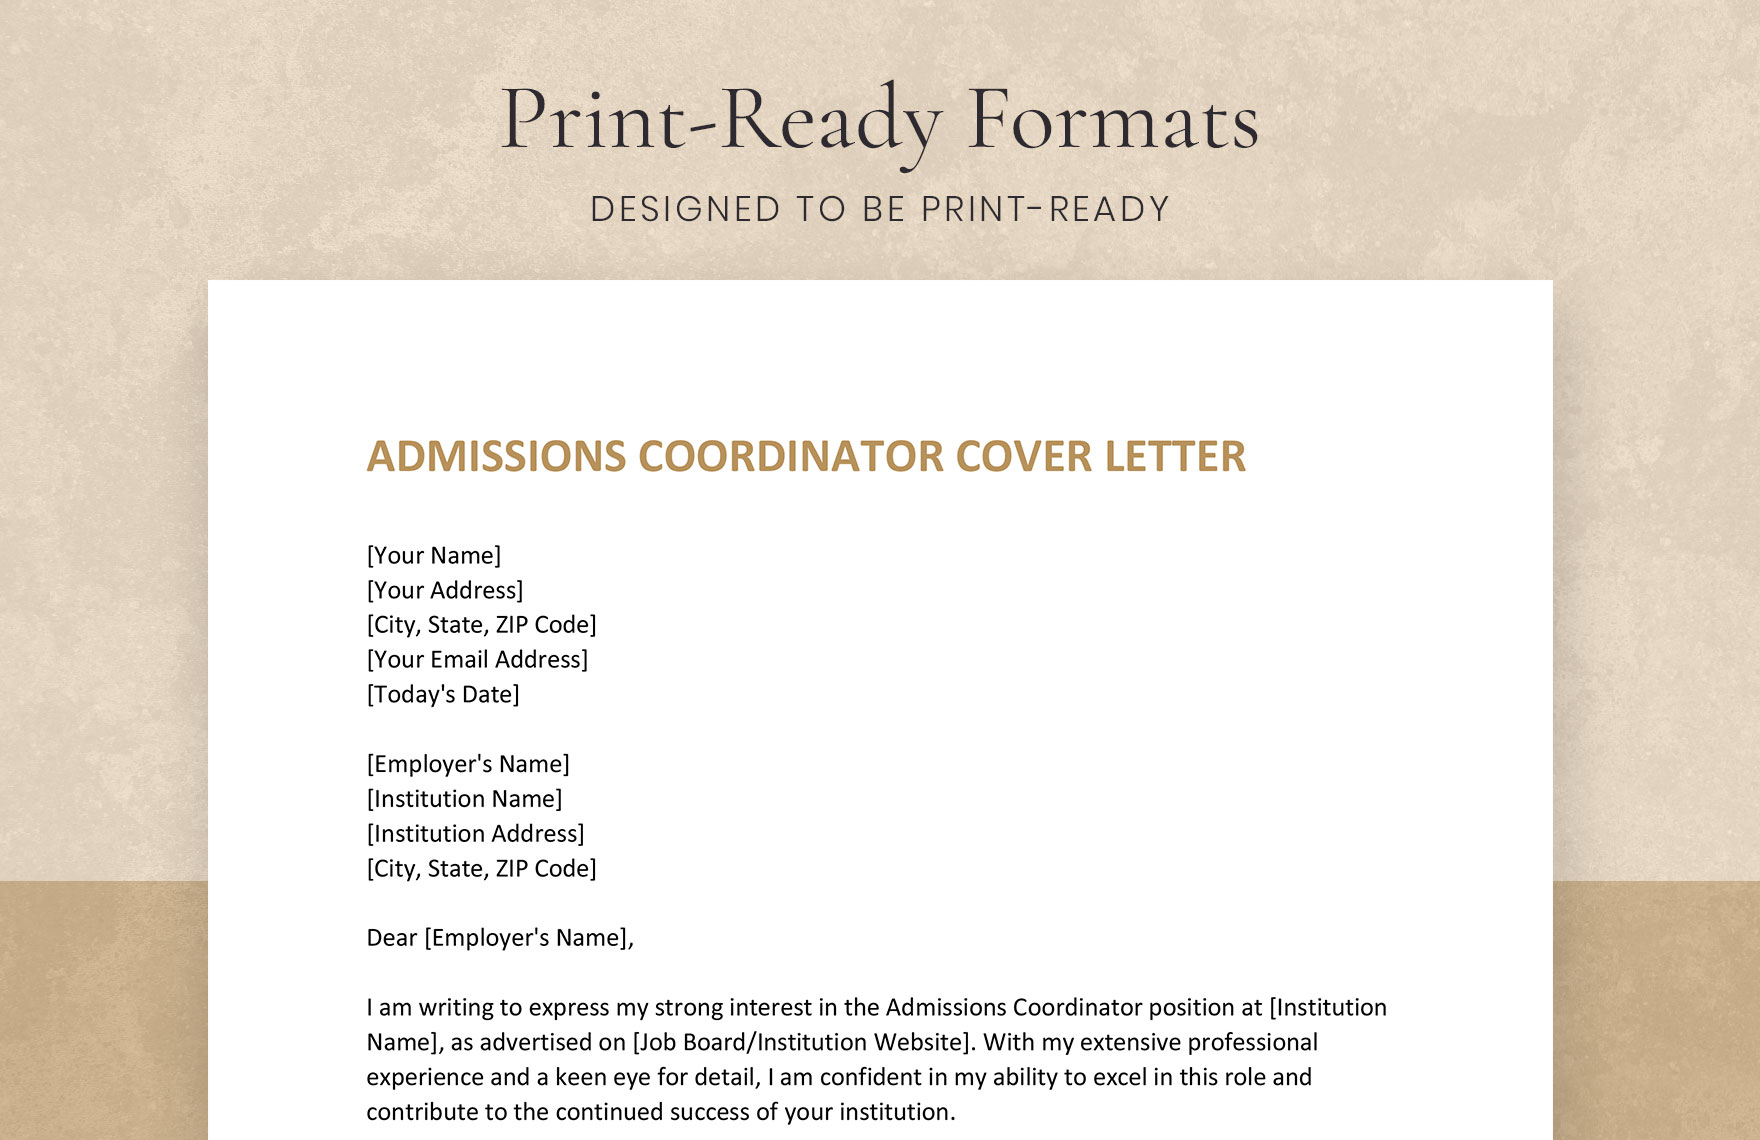 Admissions Coordinator Cover Letter